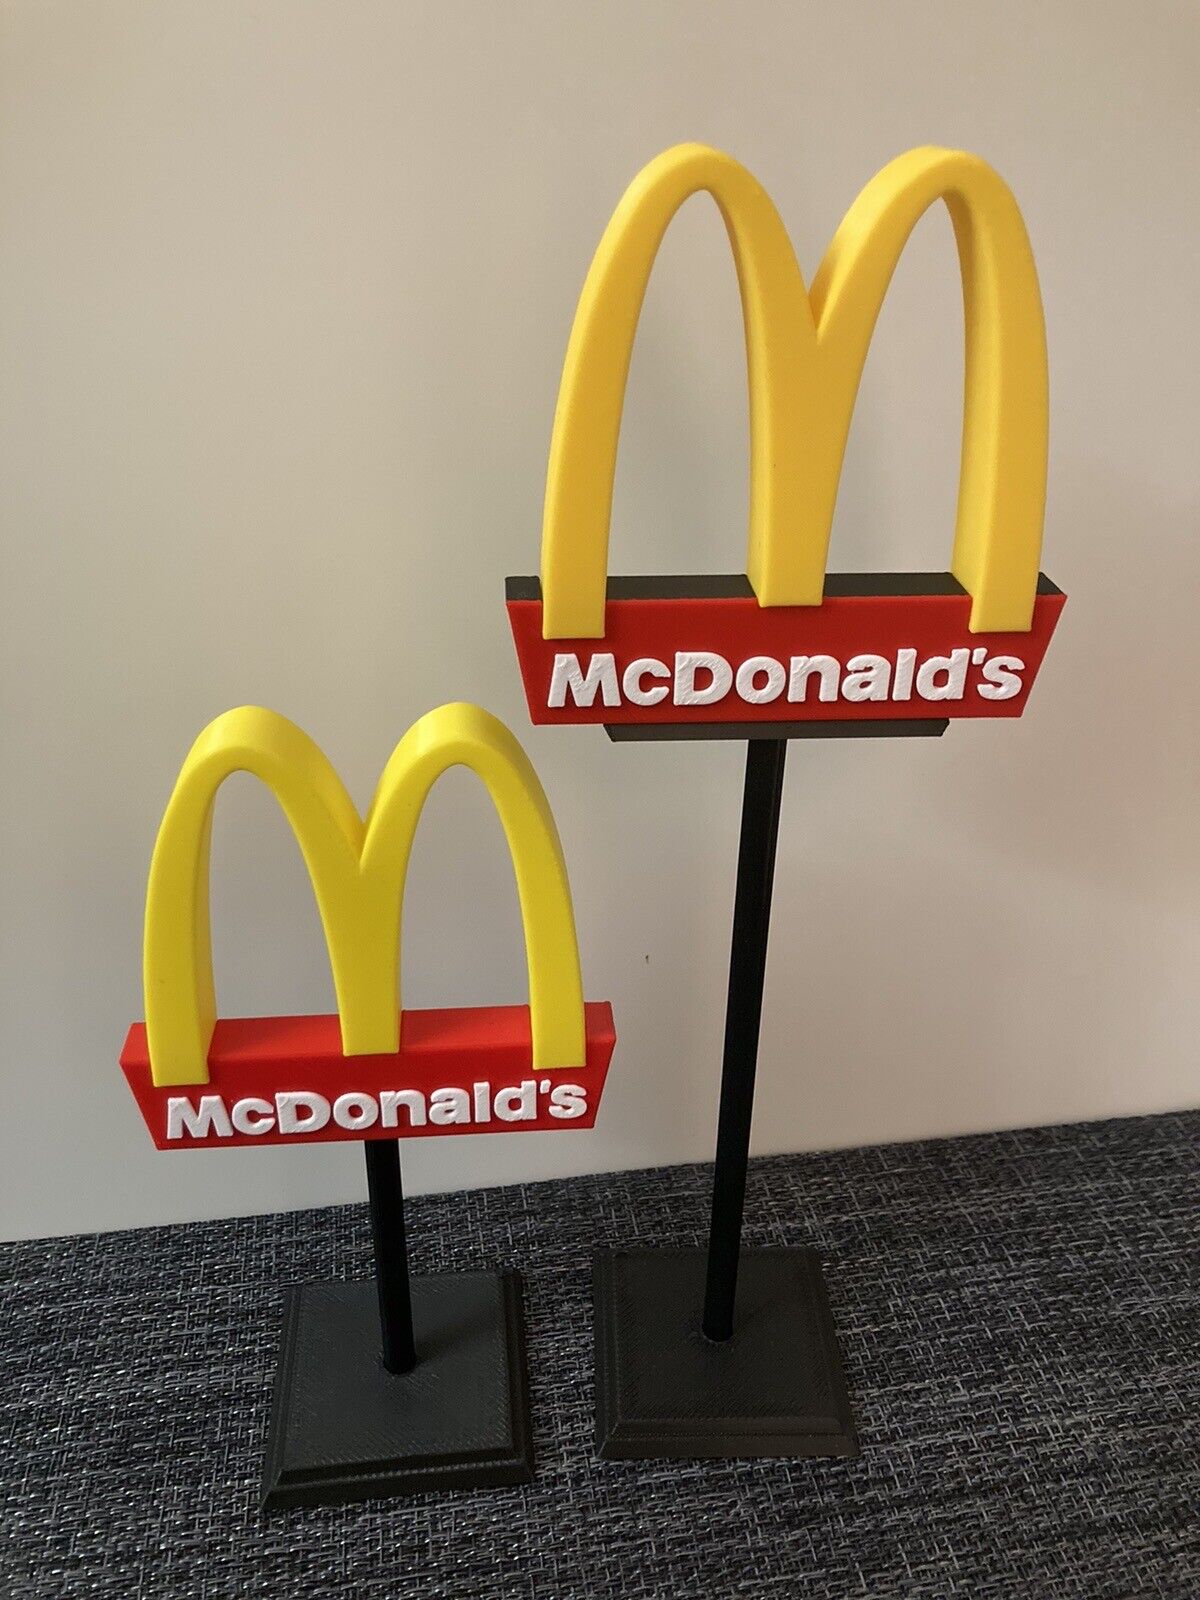 3D Printed: McDonald’s Big “M” Advertising Sign Golden Arches